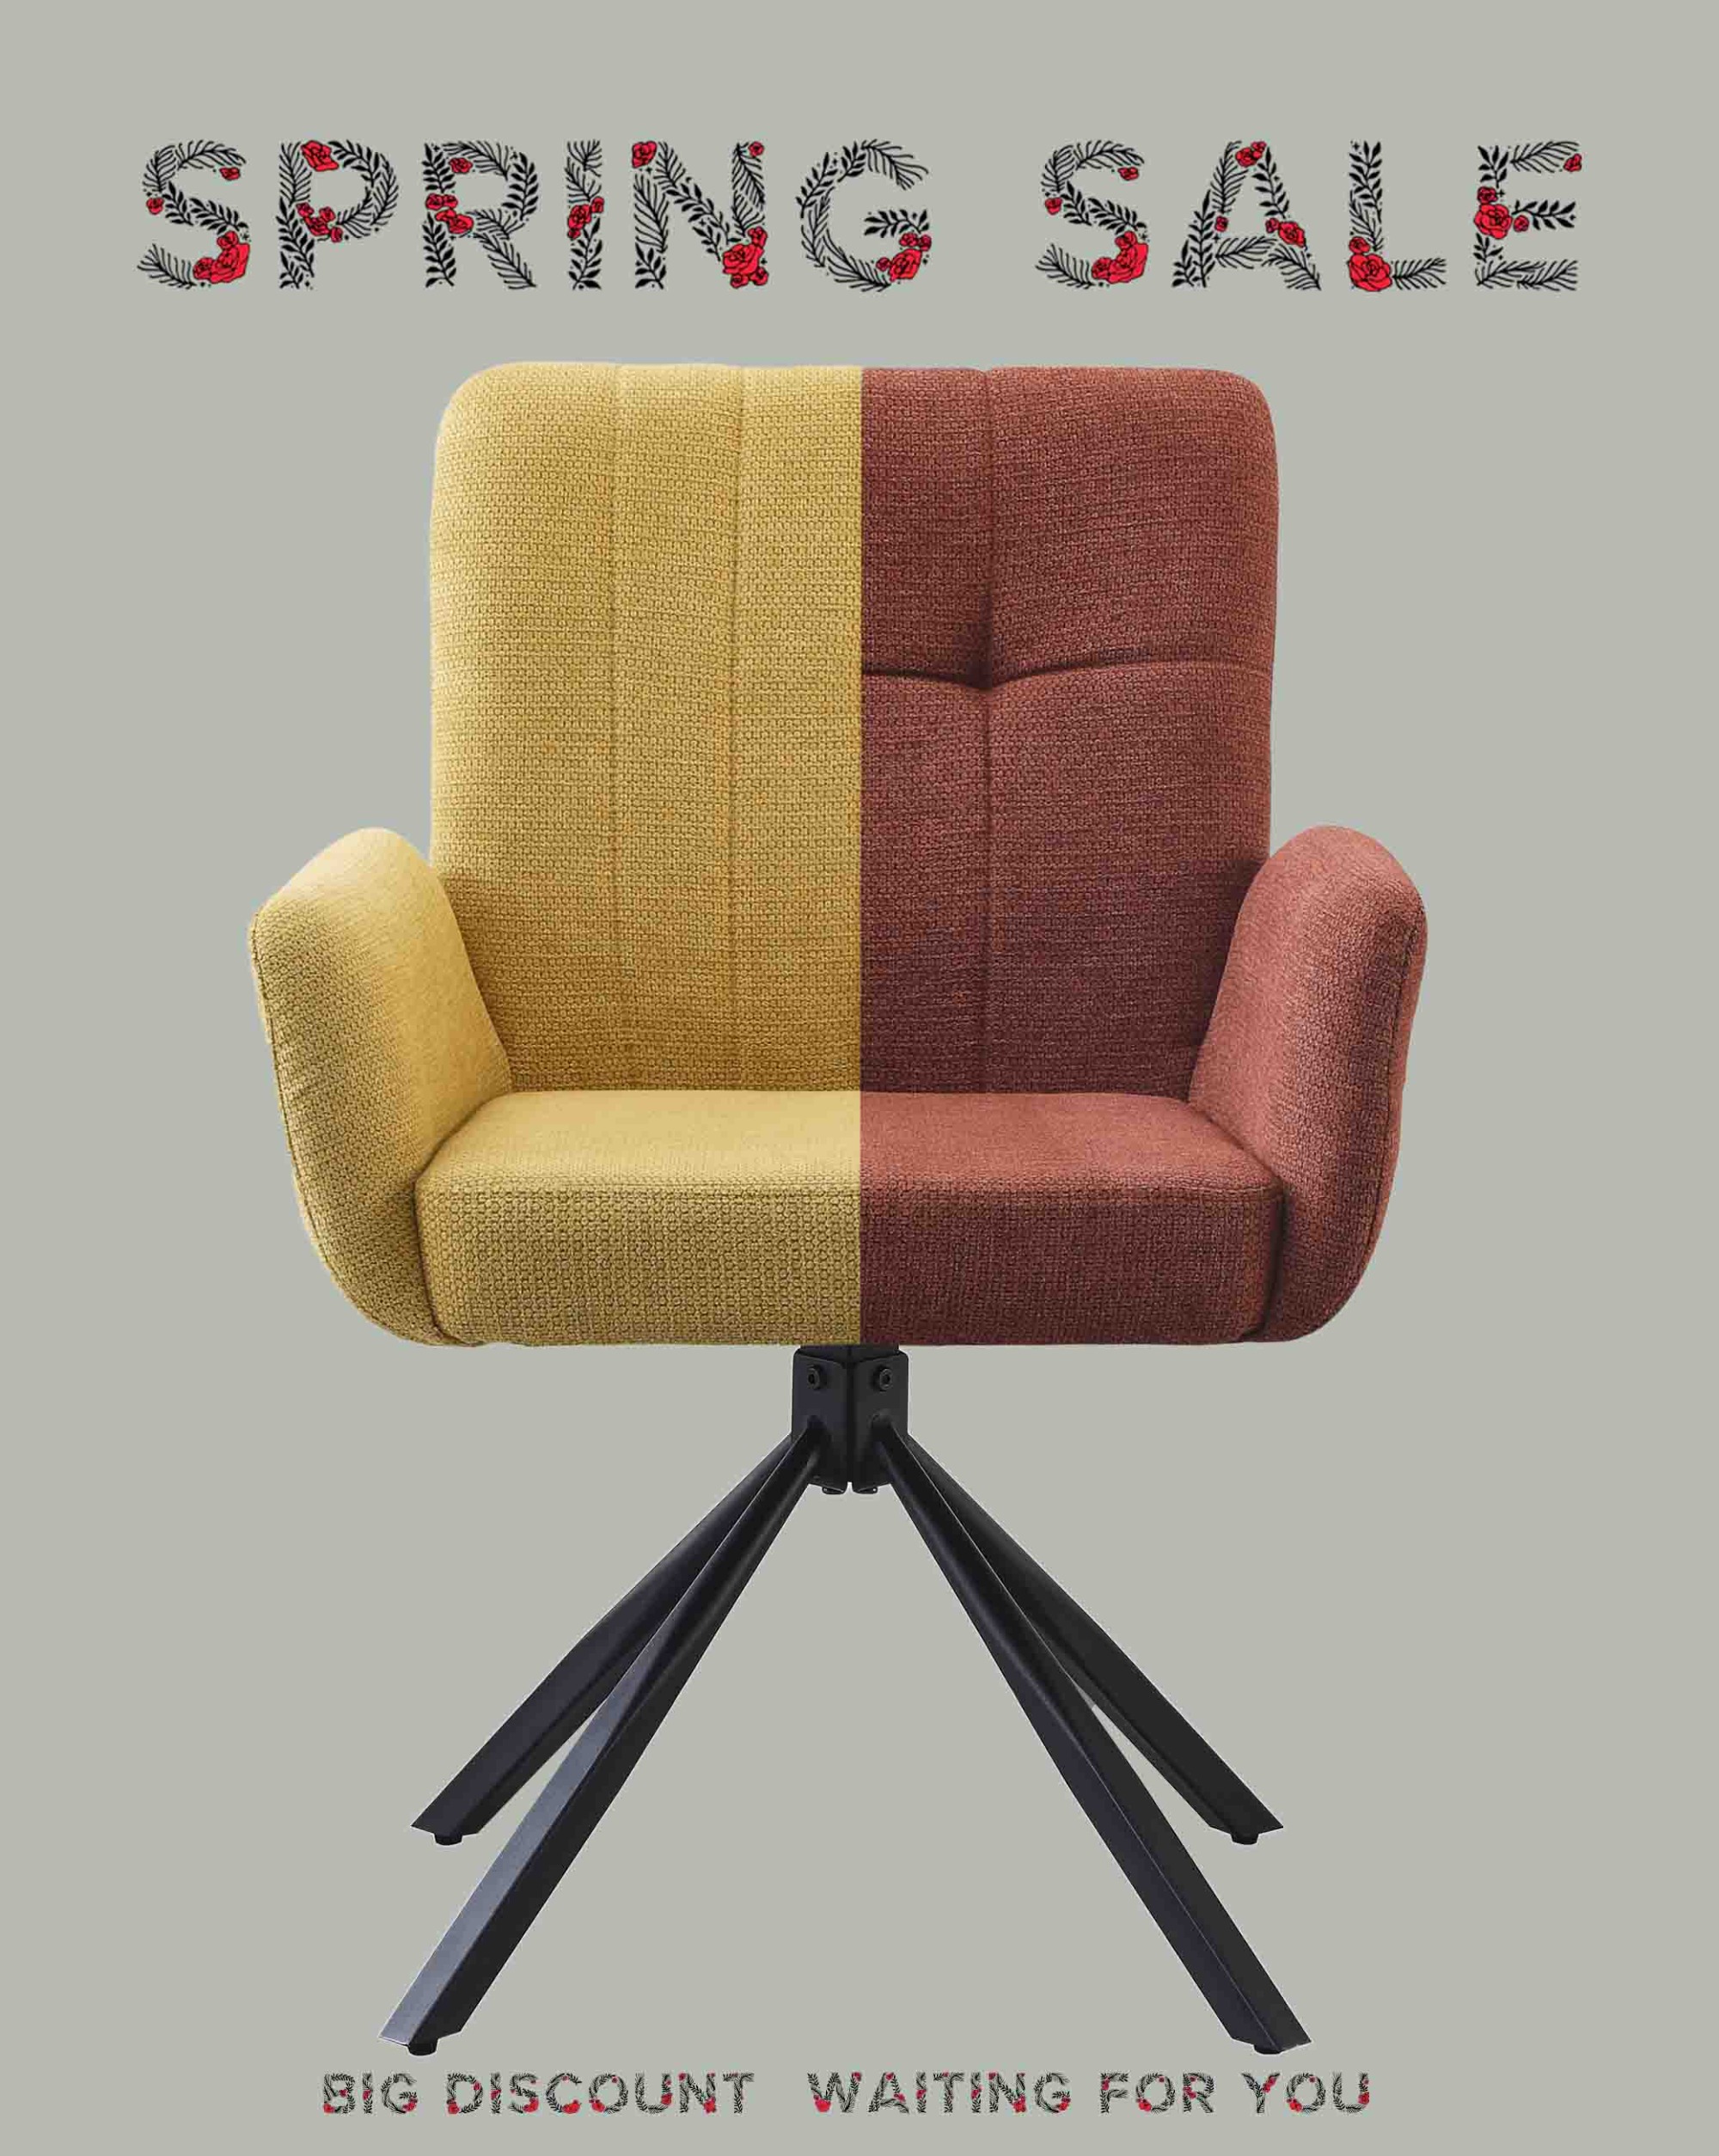 Spring Discount on Dining Tables and Chairs